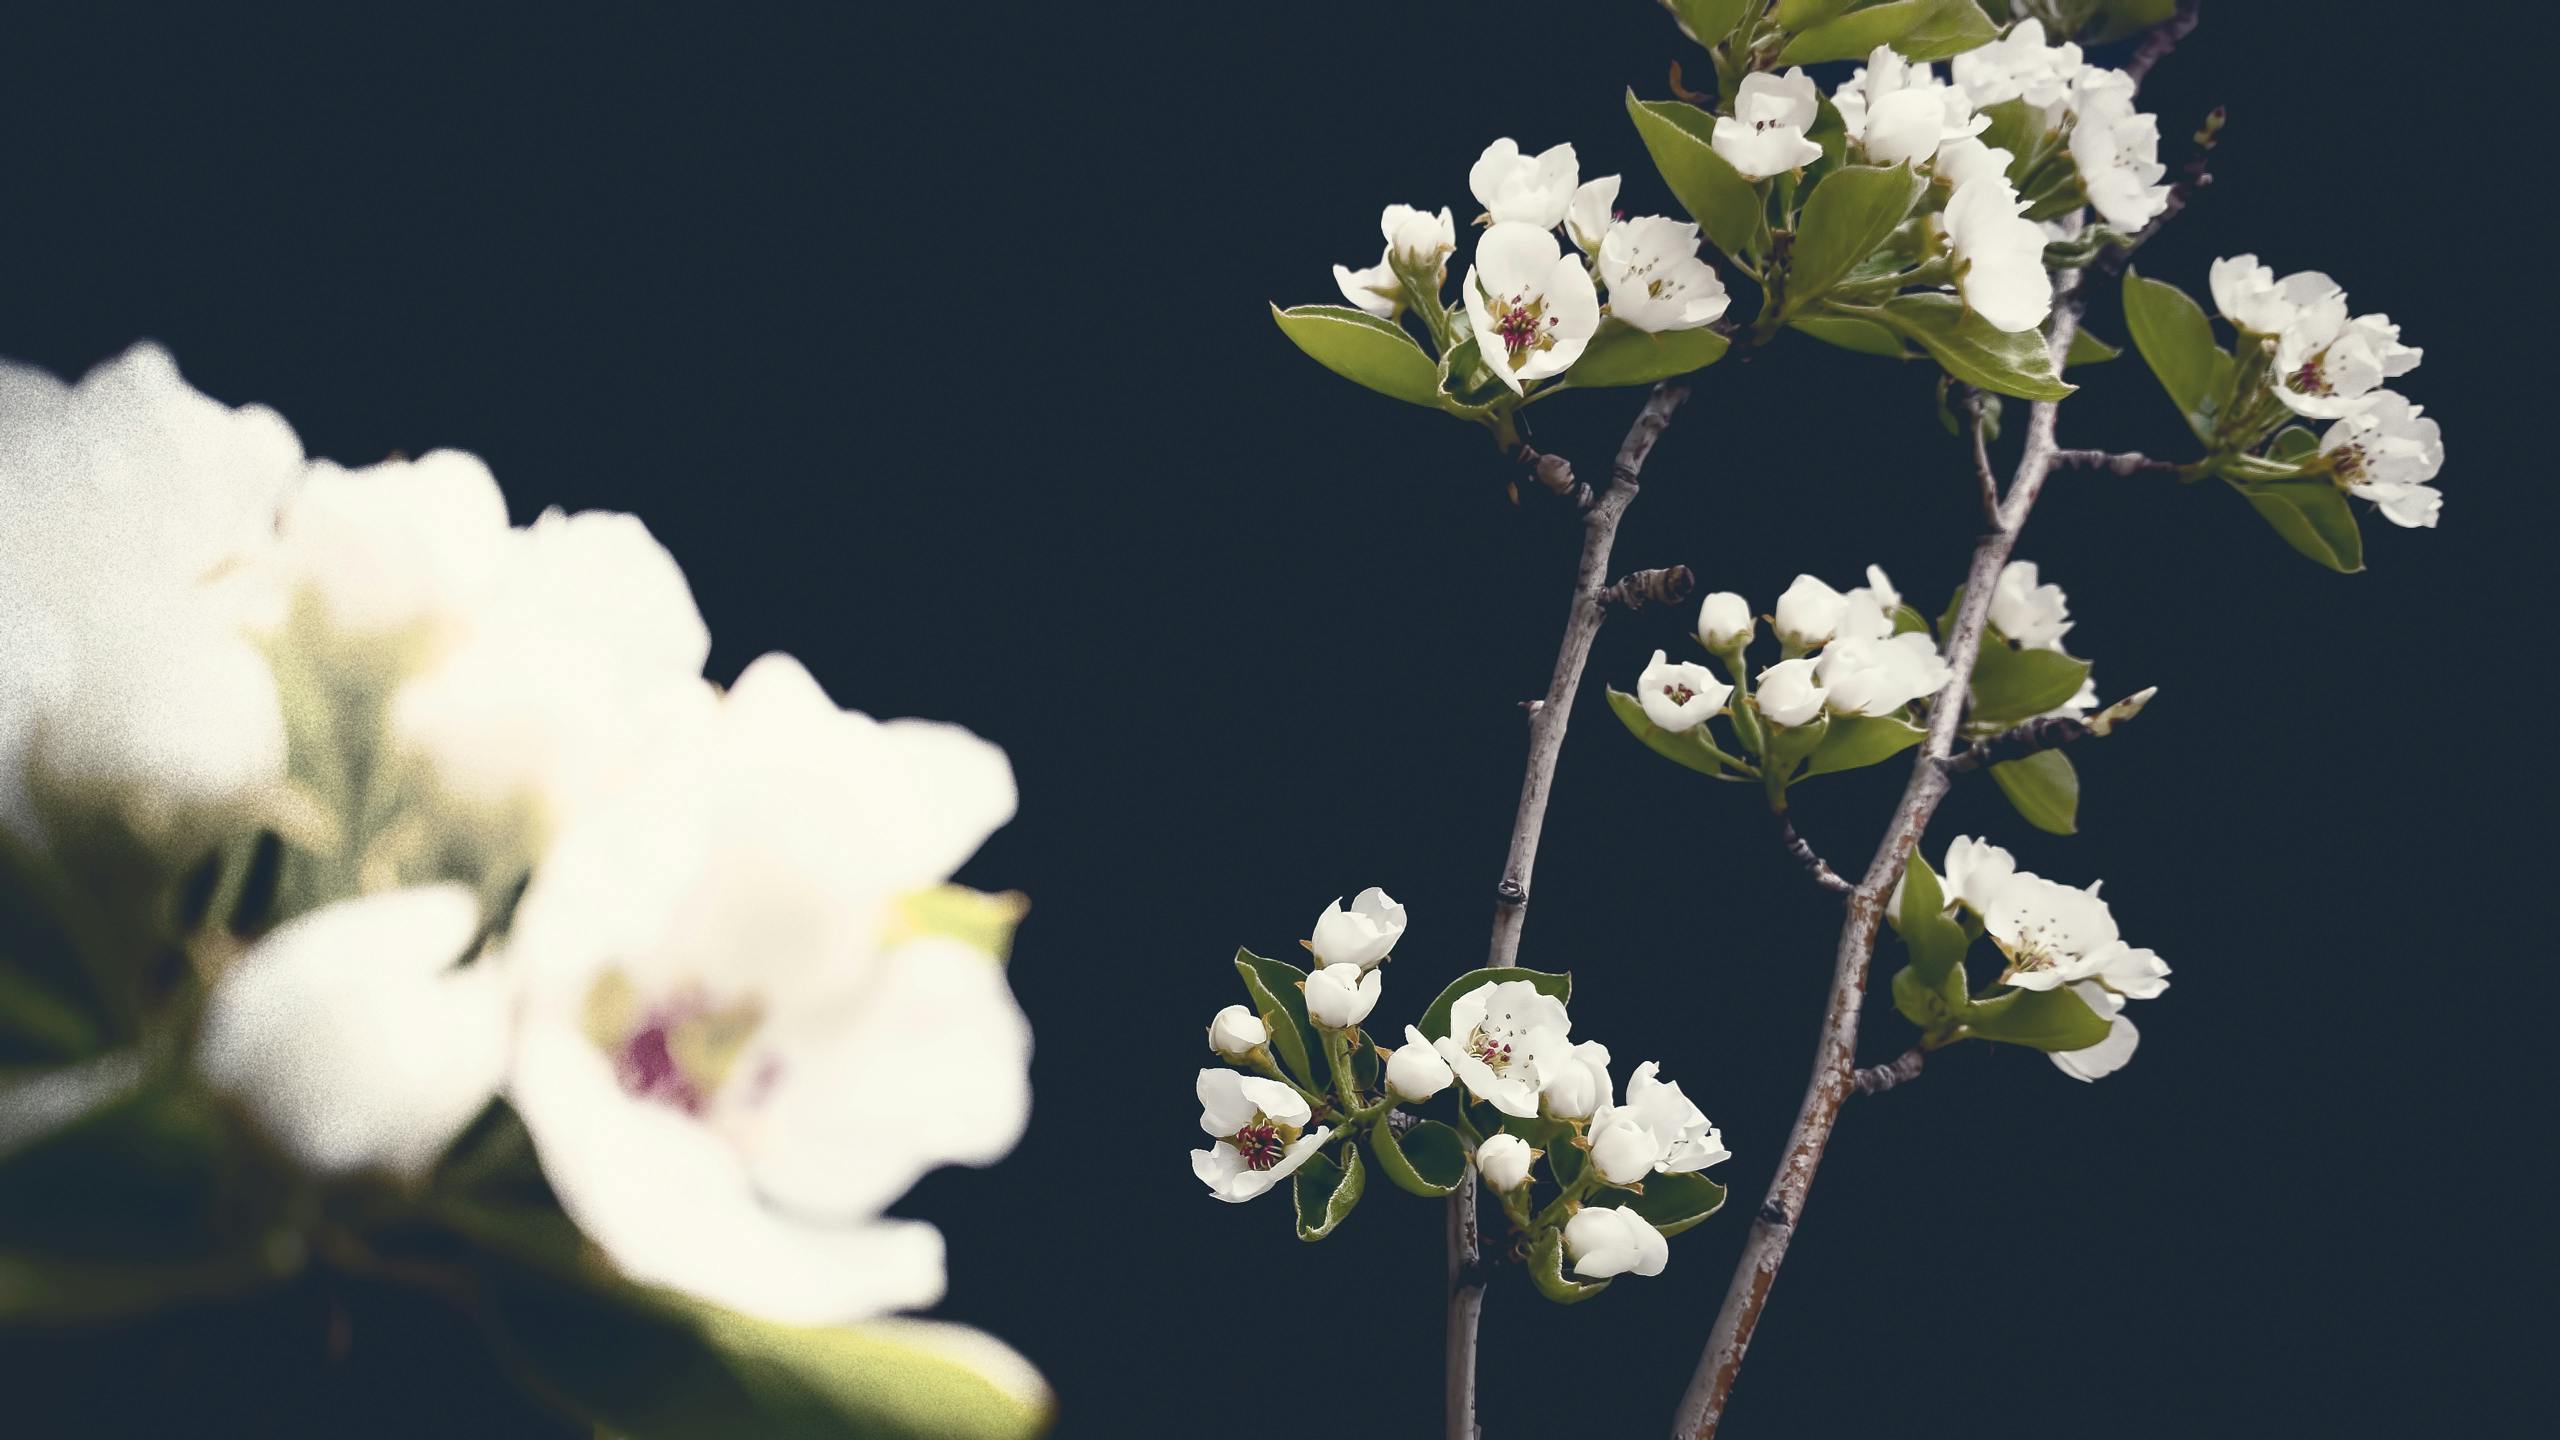 Free stock photo of blossoms, flowers, pear blossoms